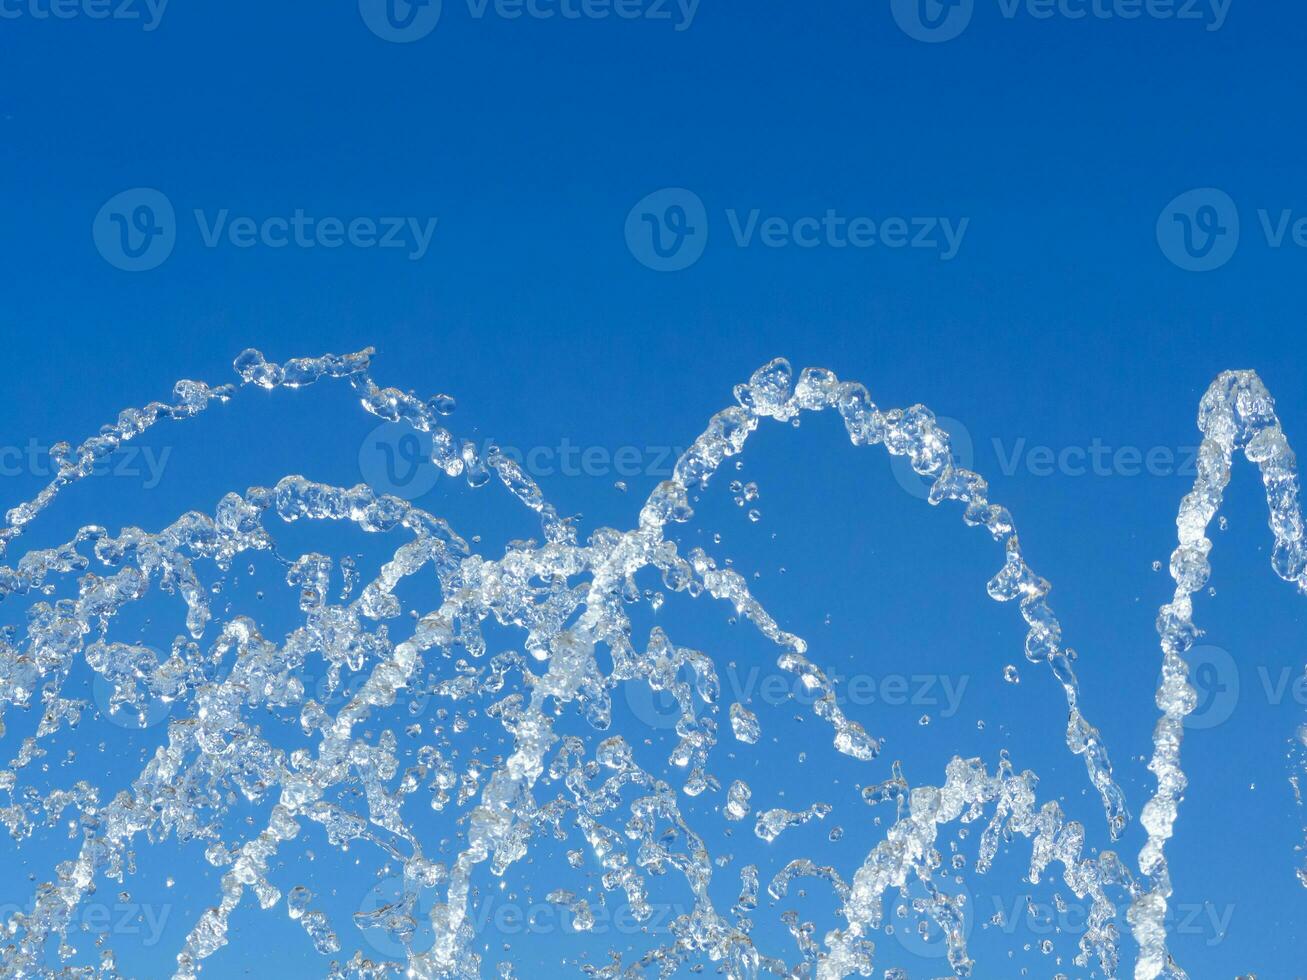 Water dropolets and streams - blue sky background photo